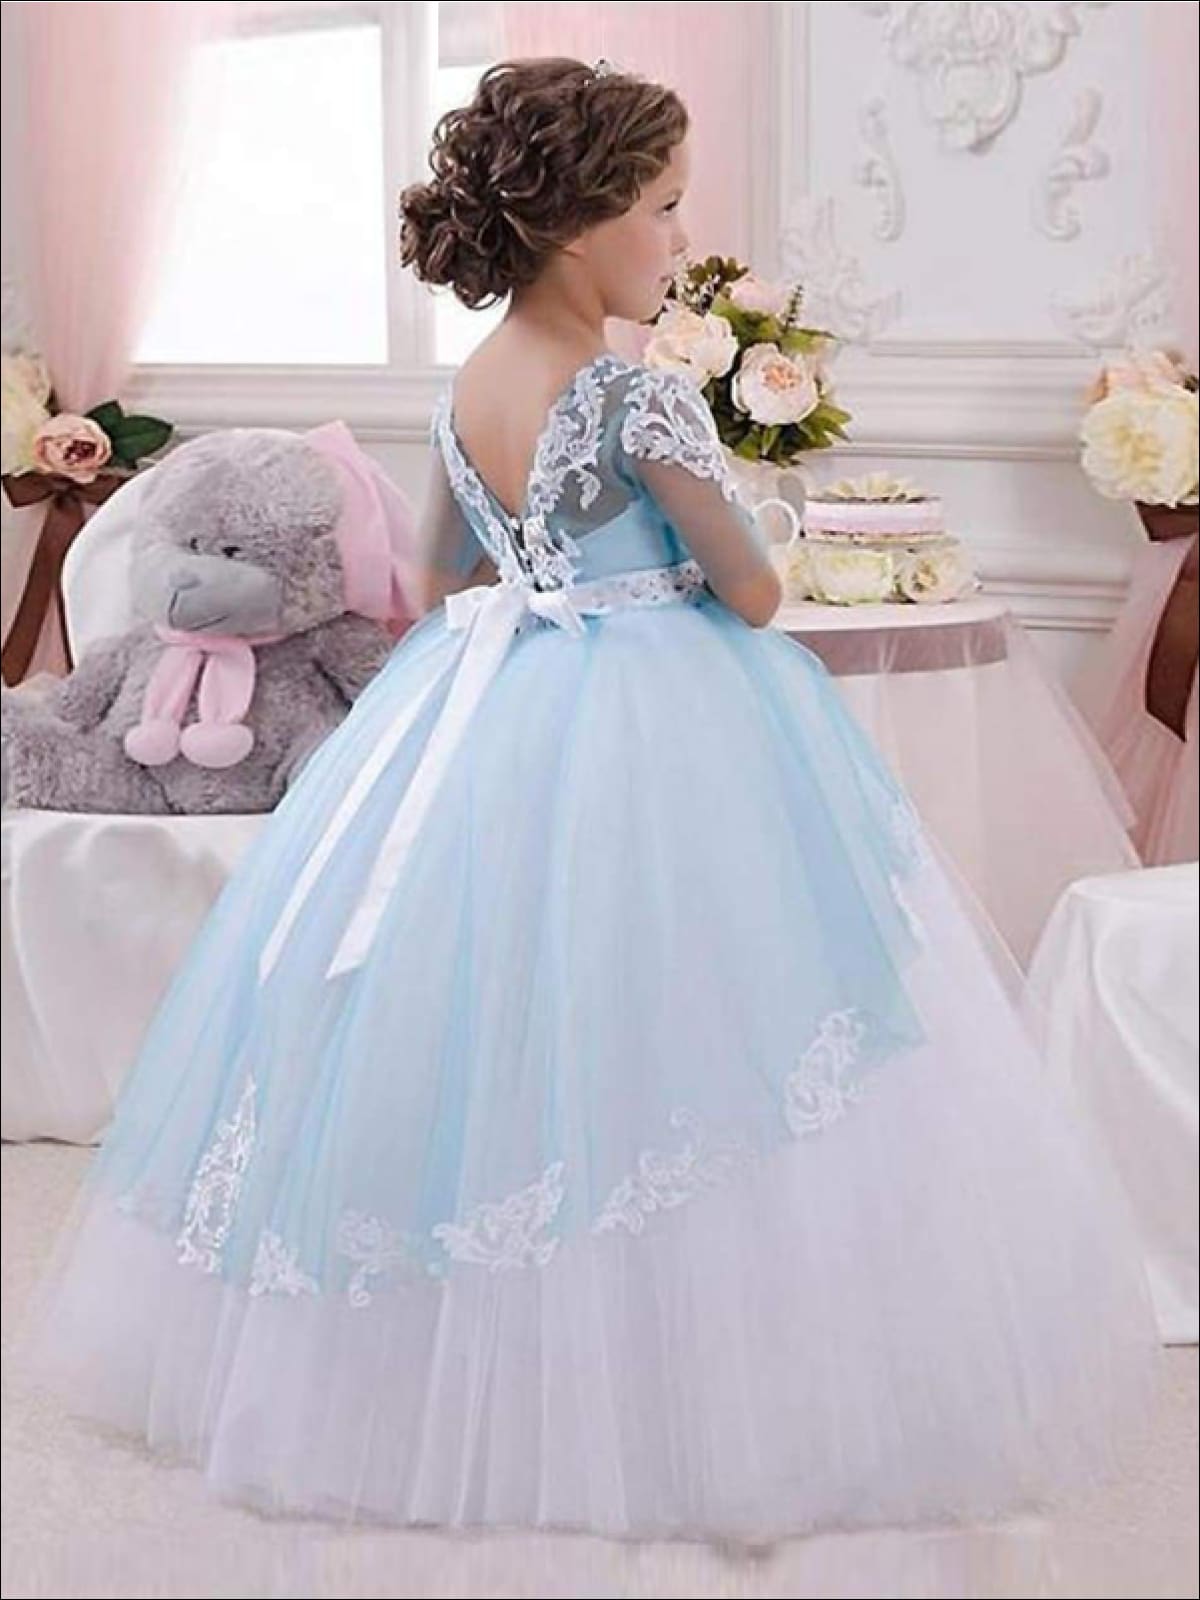 Girls Blue & White Lace & Tulle Flower Girls Pageant Style Gown Dress - Girls Gown